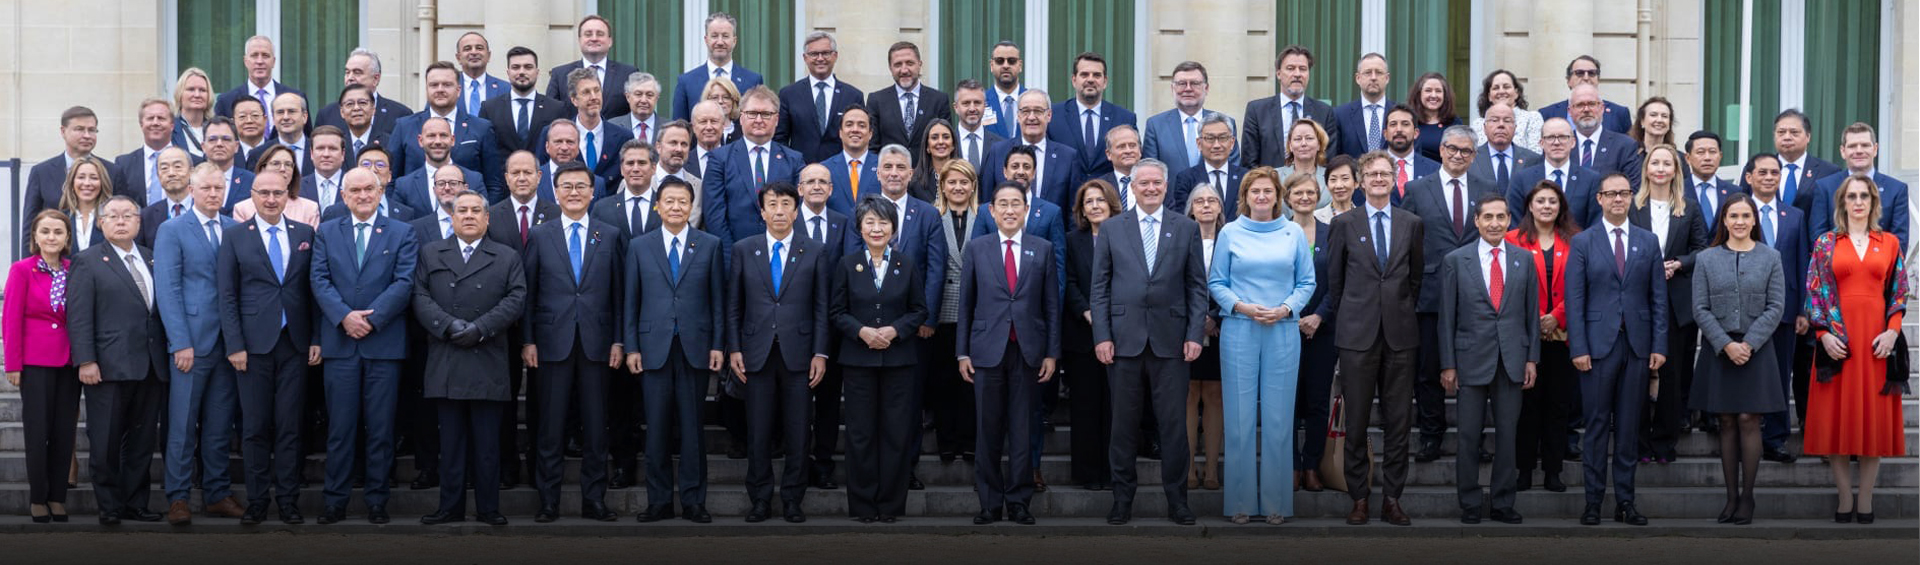 Mrs. Nadia ETTAH attends the OECD Ministerial Council Meeting (MCM), May 2-3 in Paris